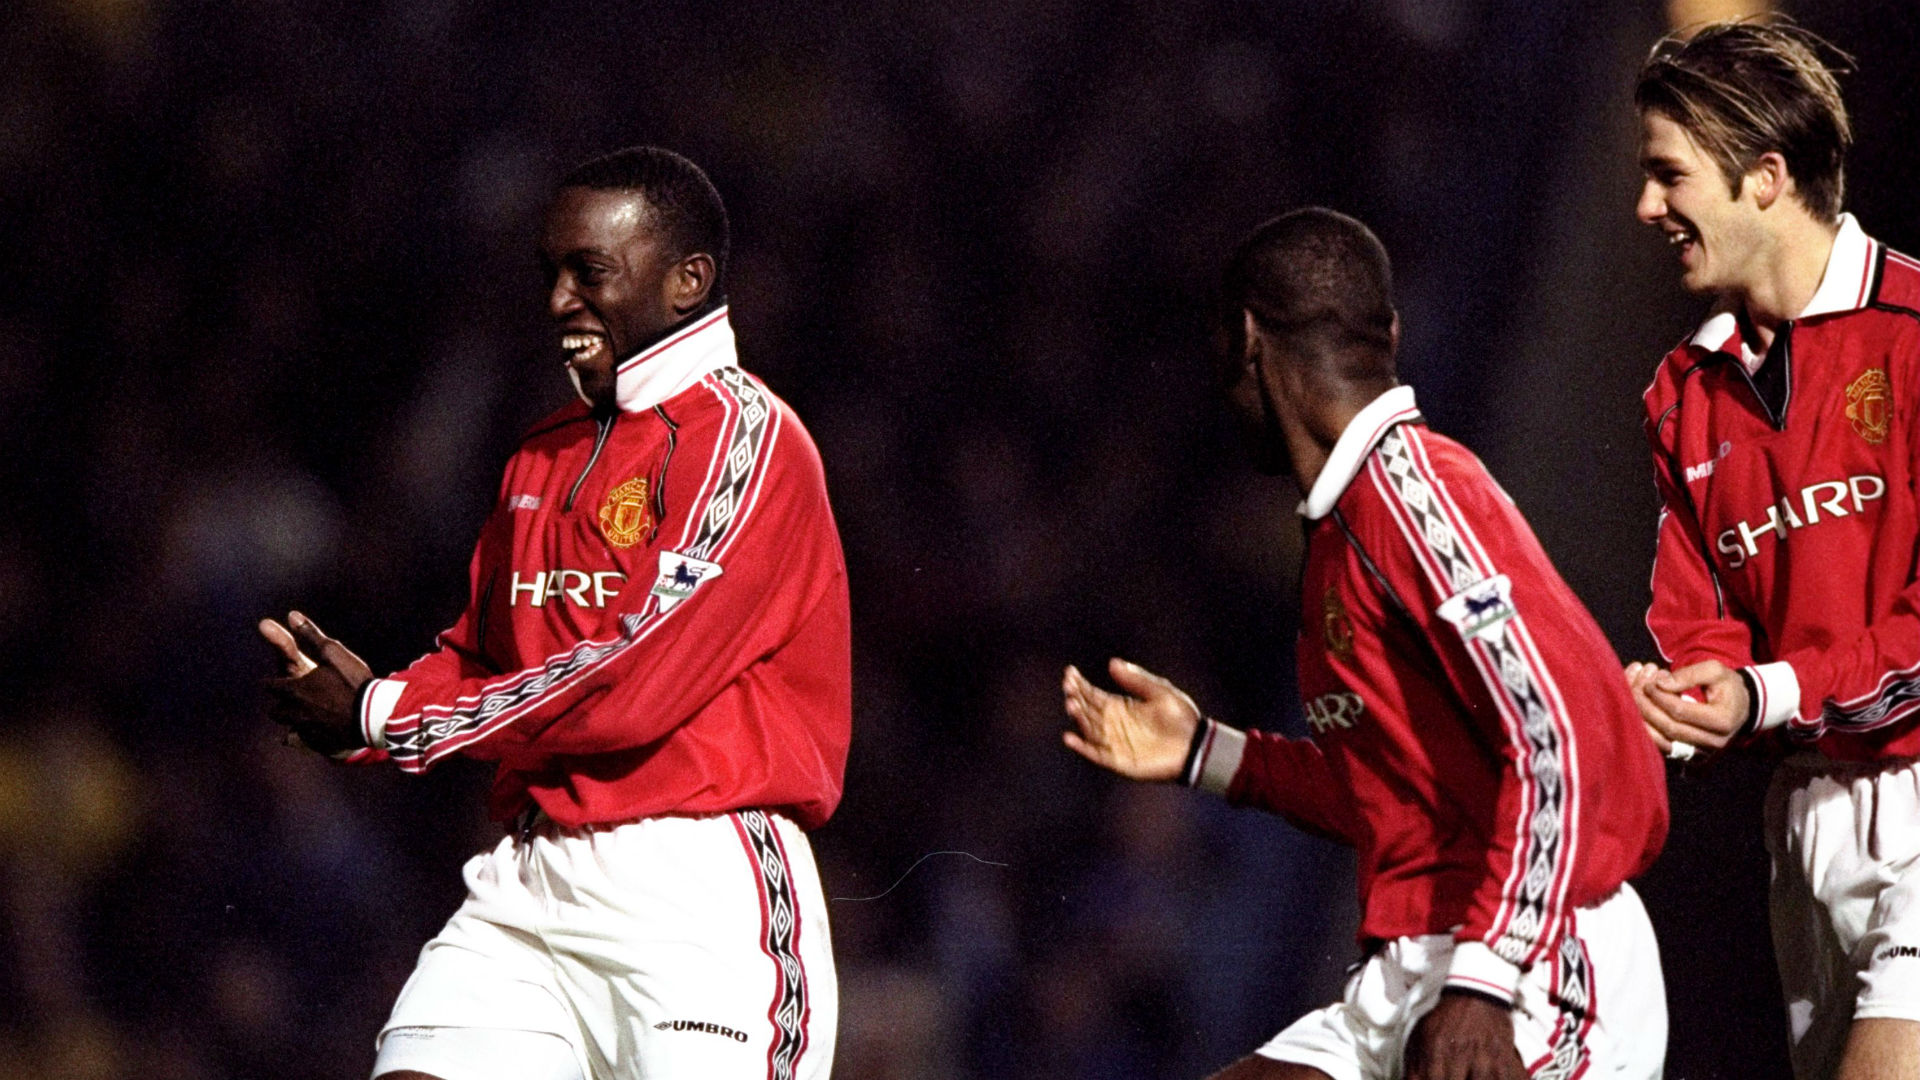 Manchester United Chelsea FA Cup 1999 Dwight Yorke - Goal.com1920 x 1080